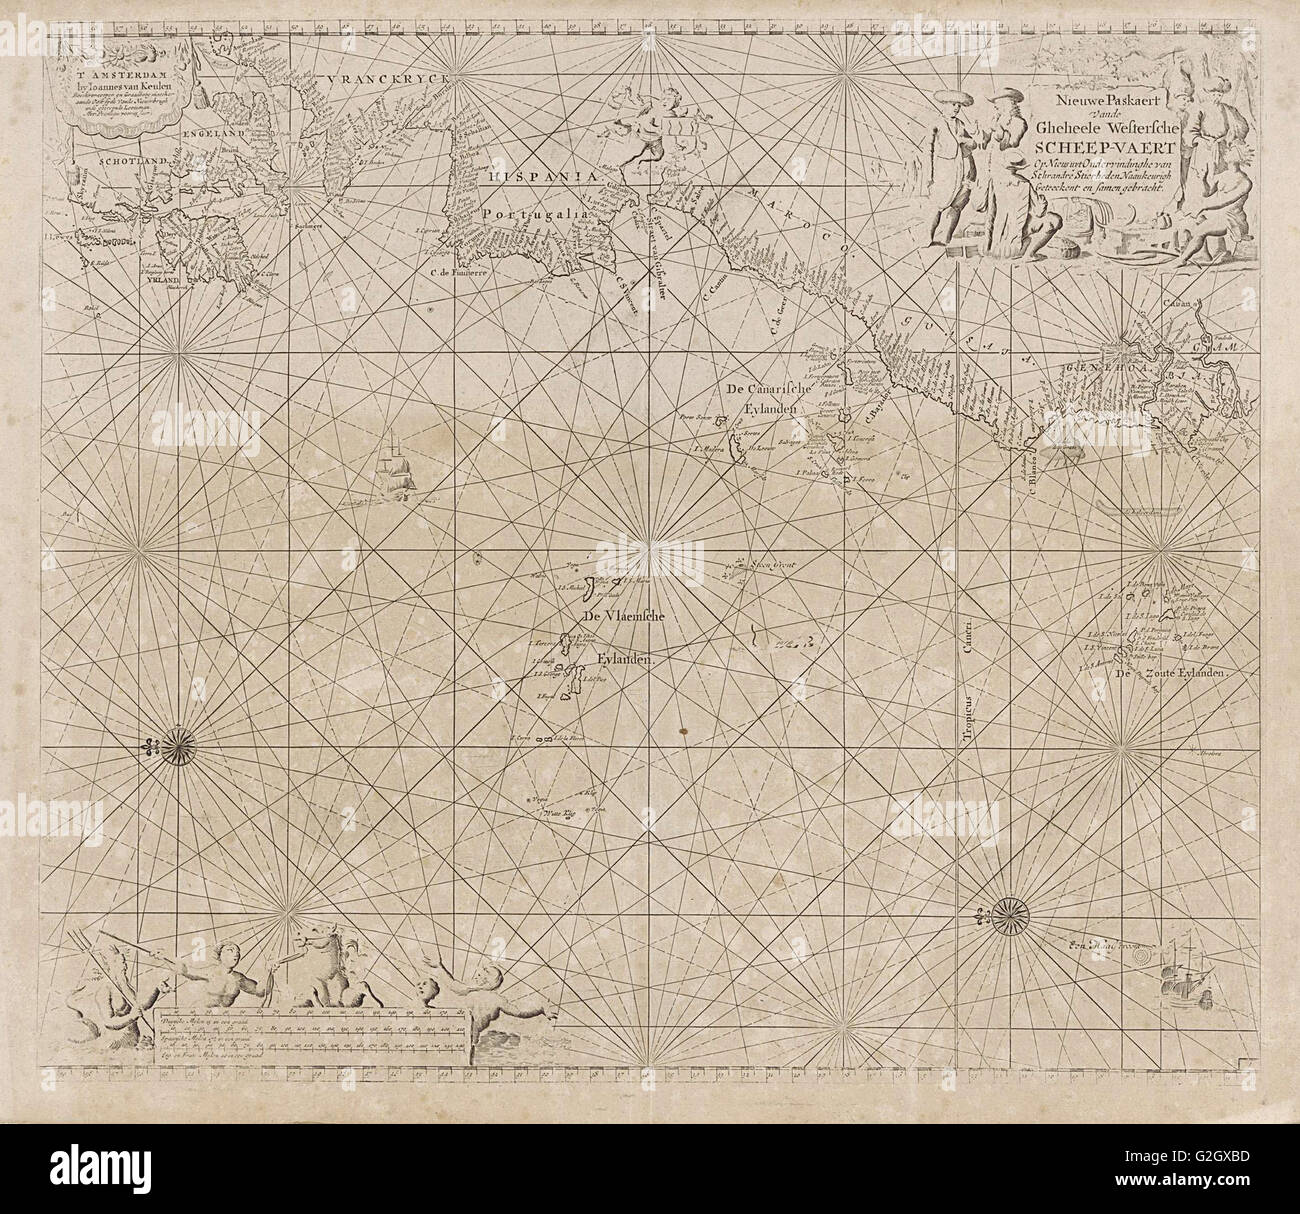 Sea chart of the Atlantic Ocean to the west coast of Europe and parts of Africa, Jan Luyken, Johannes van Keulen I, unknown Stock Photo